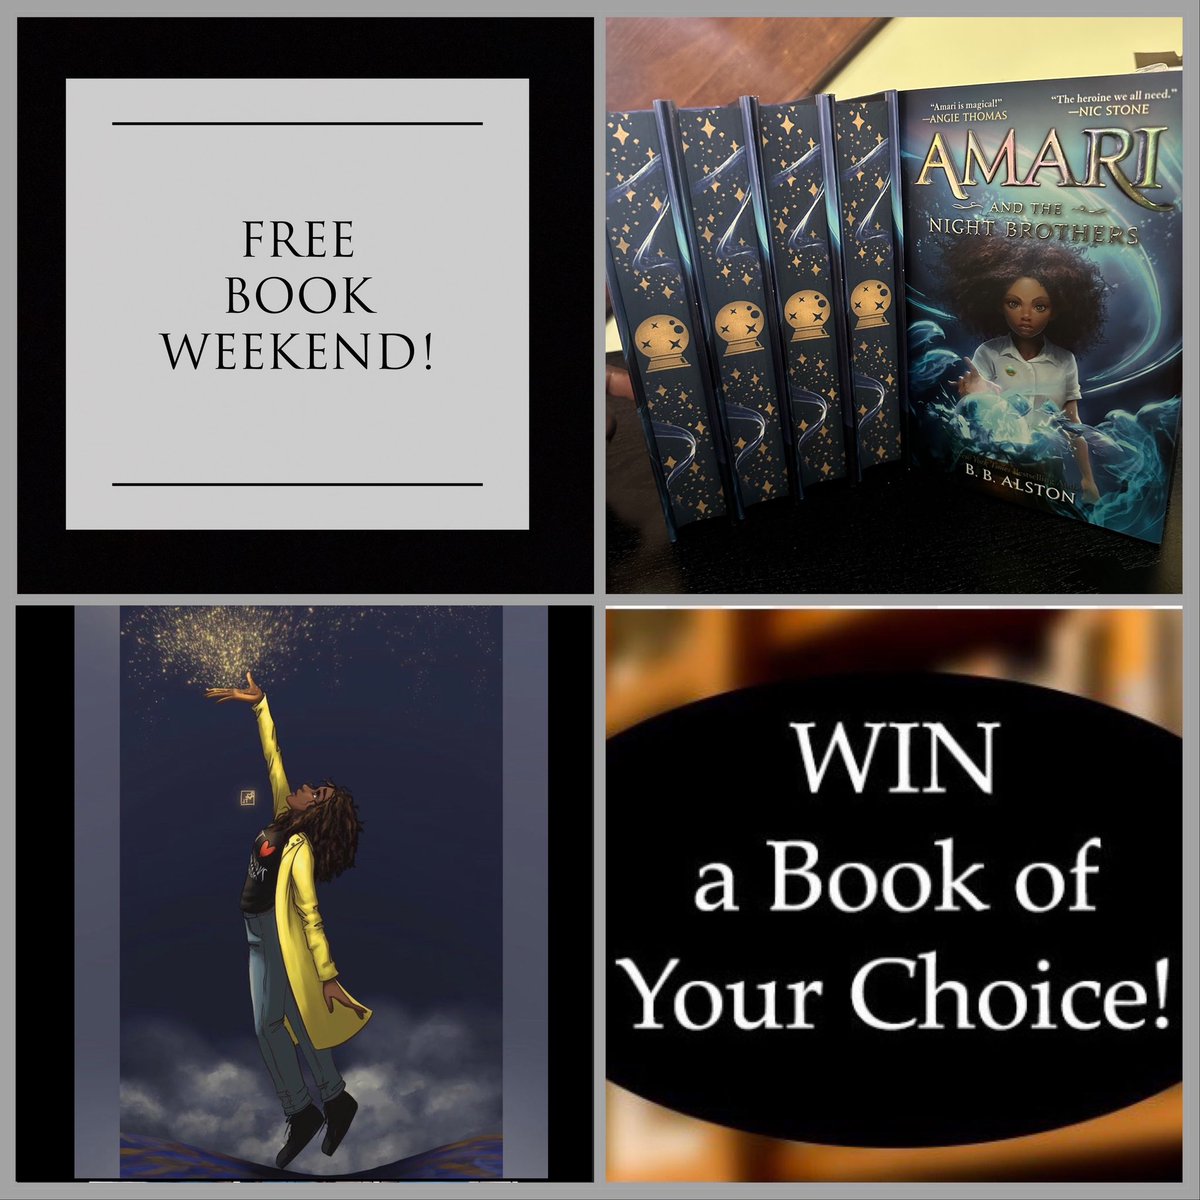 FREE BOOK WEEKEND! just retweet, reply, and follow and I’ll randomly select 5 winners to receive a signed special edition of AMARI AND THE NIGHT BROTHERS, an Amari art card, and an additional book of your choice!